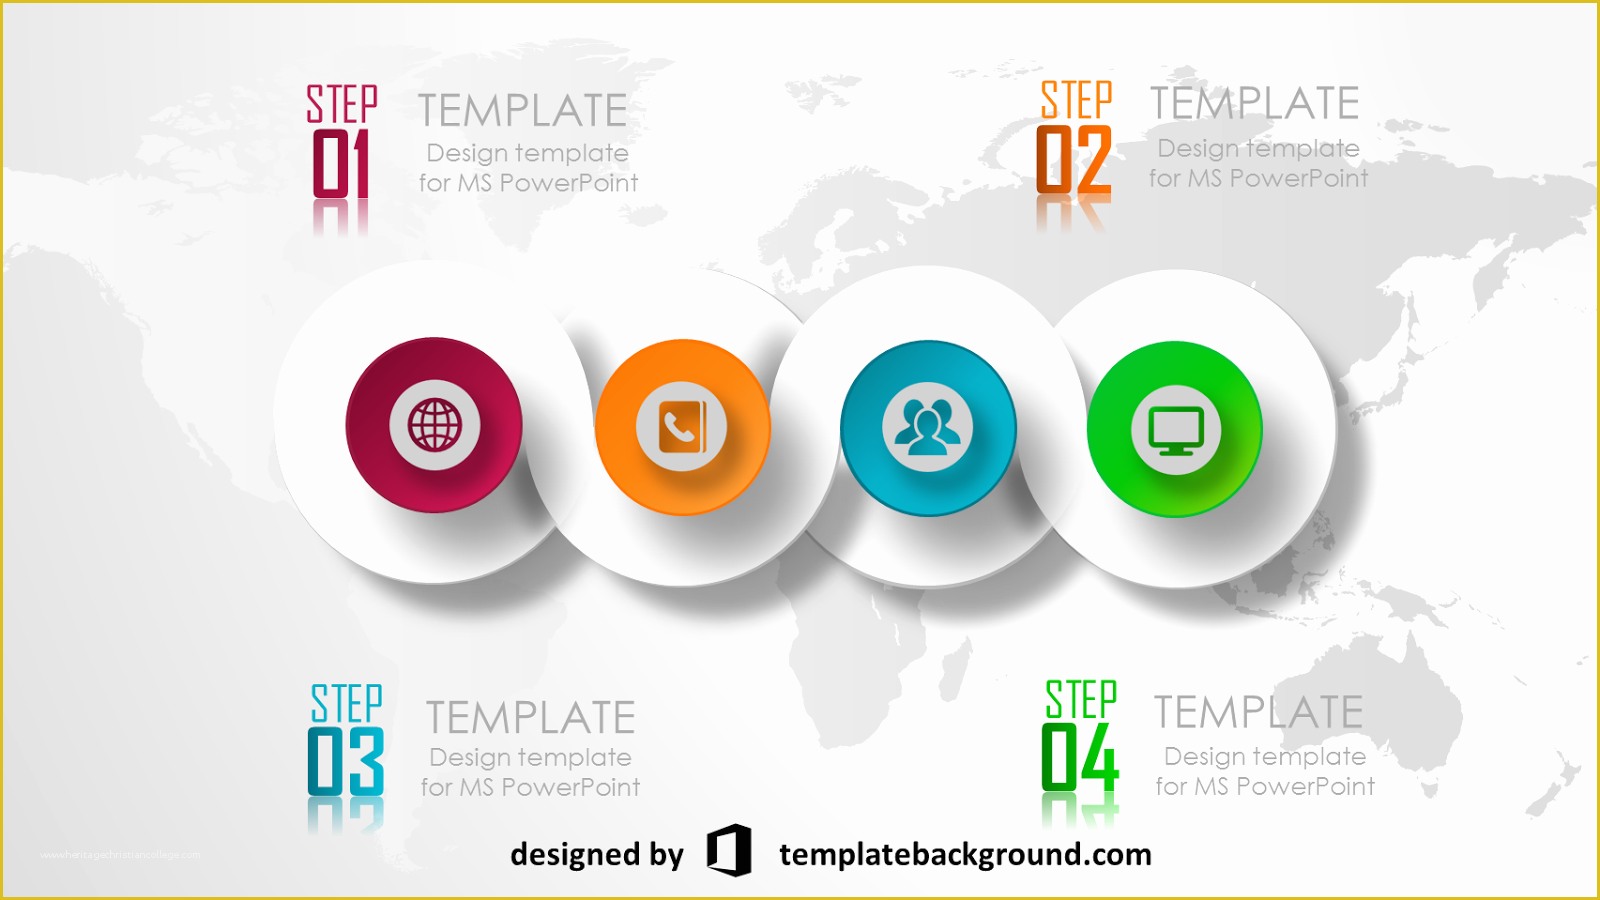 Animated Powerpoint Templates Free Download Of Beaufiful Powerpoint Animation Templates